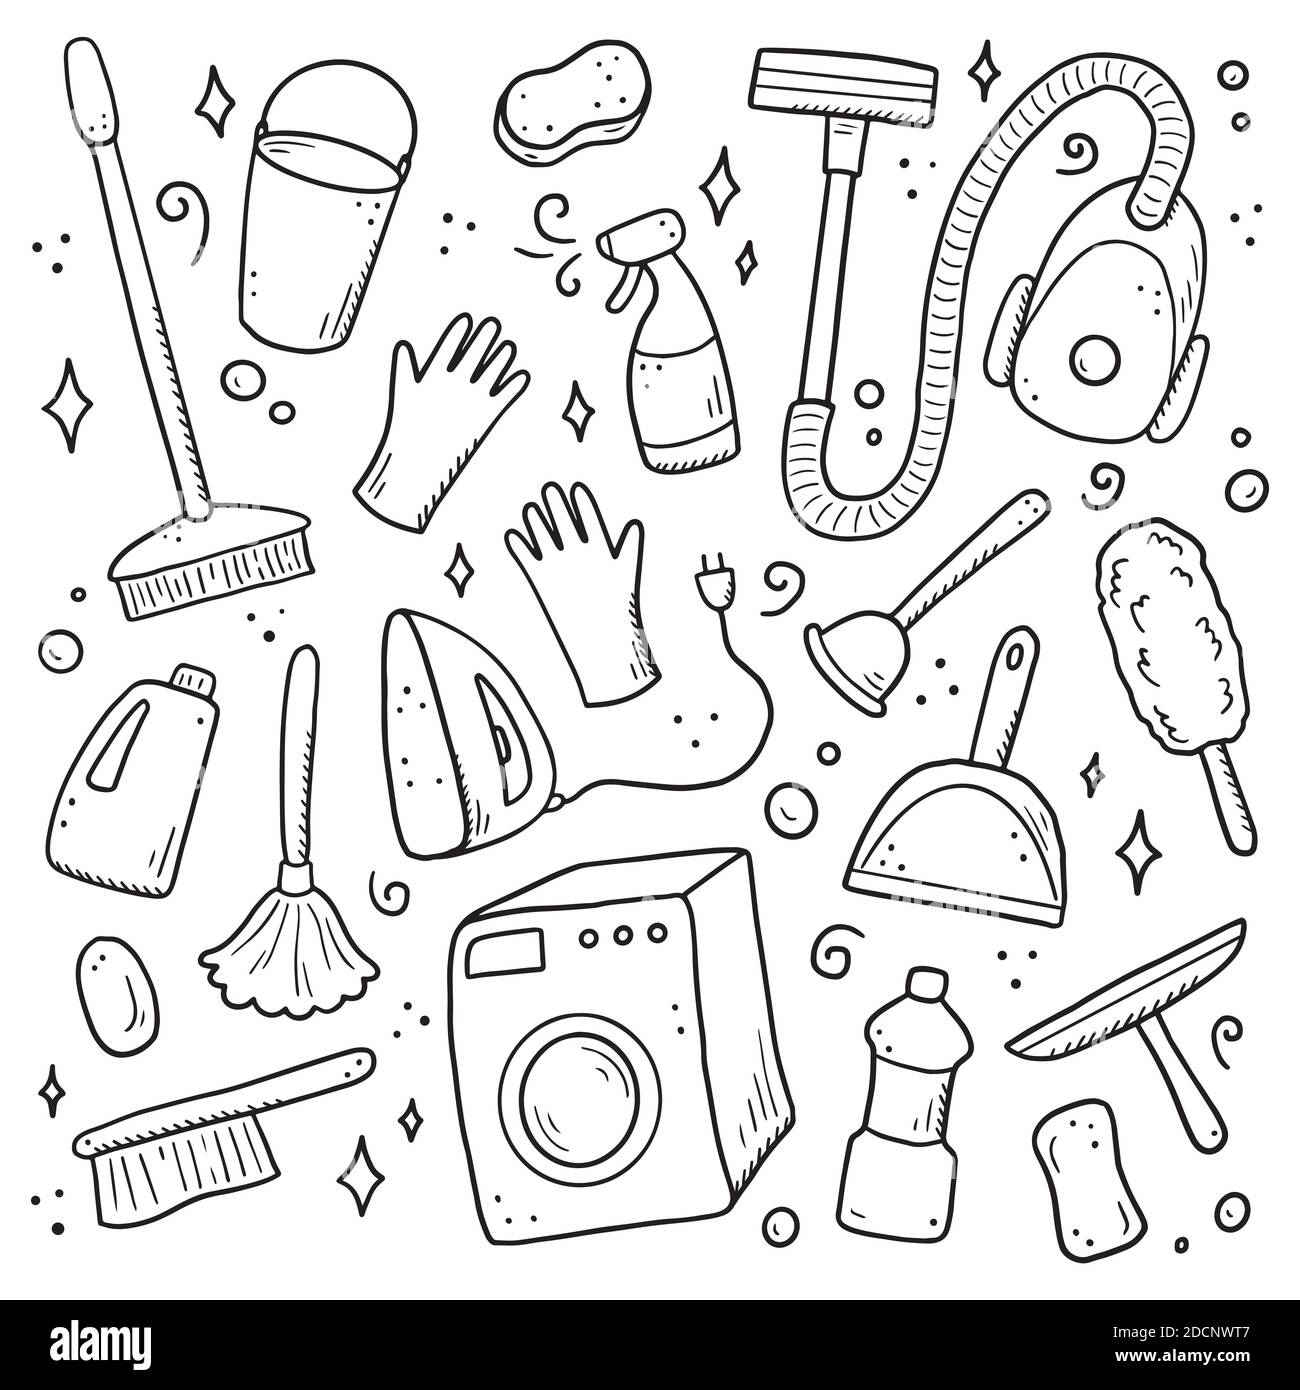 https://c8.alamy.com/comp/2DCNWT7/hand-drawn-set-of-cleaning-equipments-sponge-vacuum-spray-broom-bucket-comic-doodle-sketch-style-clean-element-drawn-by-digital-brush-pen-illustration-for-icon-frame-background-2DCNWT7.jpg